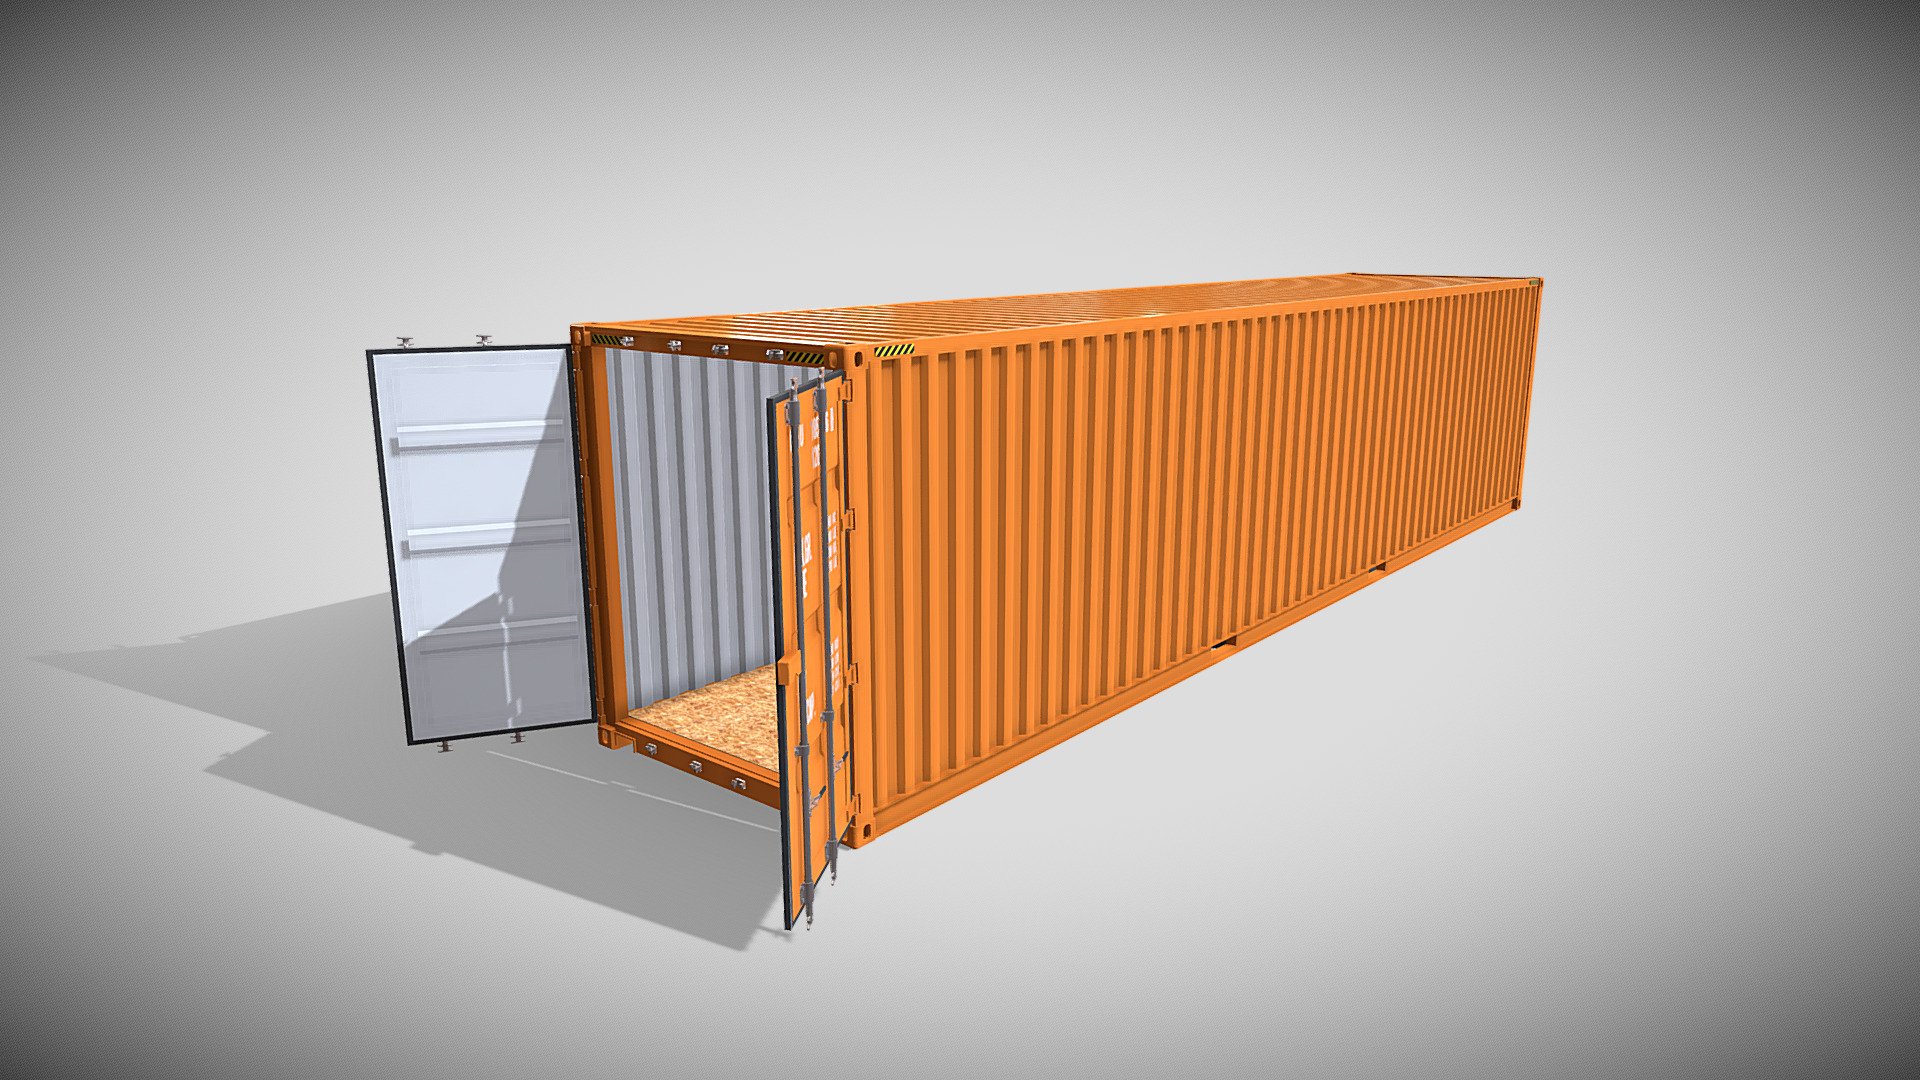 40ft Shipping Container 3d model rendered with Cycles in Blender, as per seen on attached images. 

File formats:
-.blend, rendered with cycles, as seen in the images;
-.obj, with materials applied;
-.dae, with materials applied;
-.fbx, with materials applied;
-.stl;

-.blend, with doors open, rendered with cycles, as seen in the images;
-.obj, with doors open, with materials applied;
-.dae, with doors open, with materials applied;
-.fbx, with doors open, with materials applied;
-.stl;

Files come named appropriately and split by file format.

3D Software:
The 3D model was originally created in Blender 2.8 and rendered with Cycles.

Materials and textures:
The models have materials applied in all formats, and are ready to import and render.
The model comes with two png image textures.

Preview scenes:
The preview images are rendered in Blender using its built-in render engine &lsquo;Cycles' 3d model